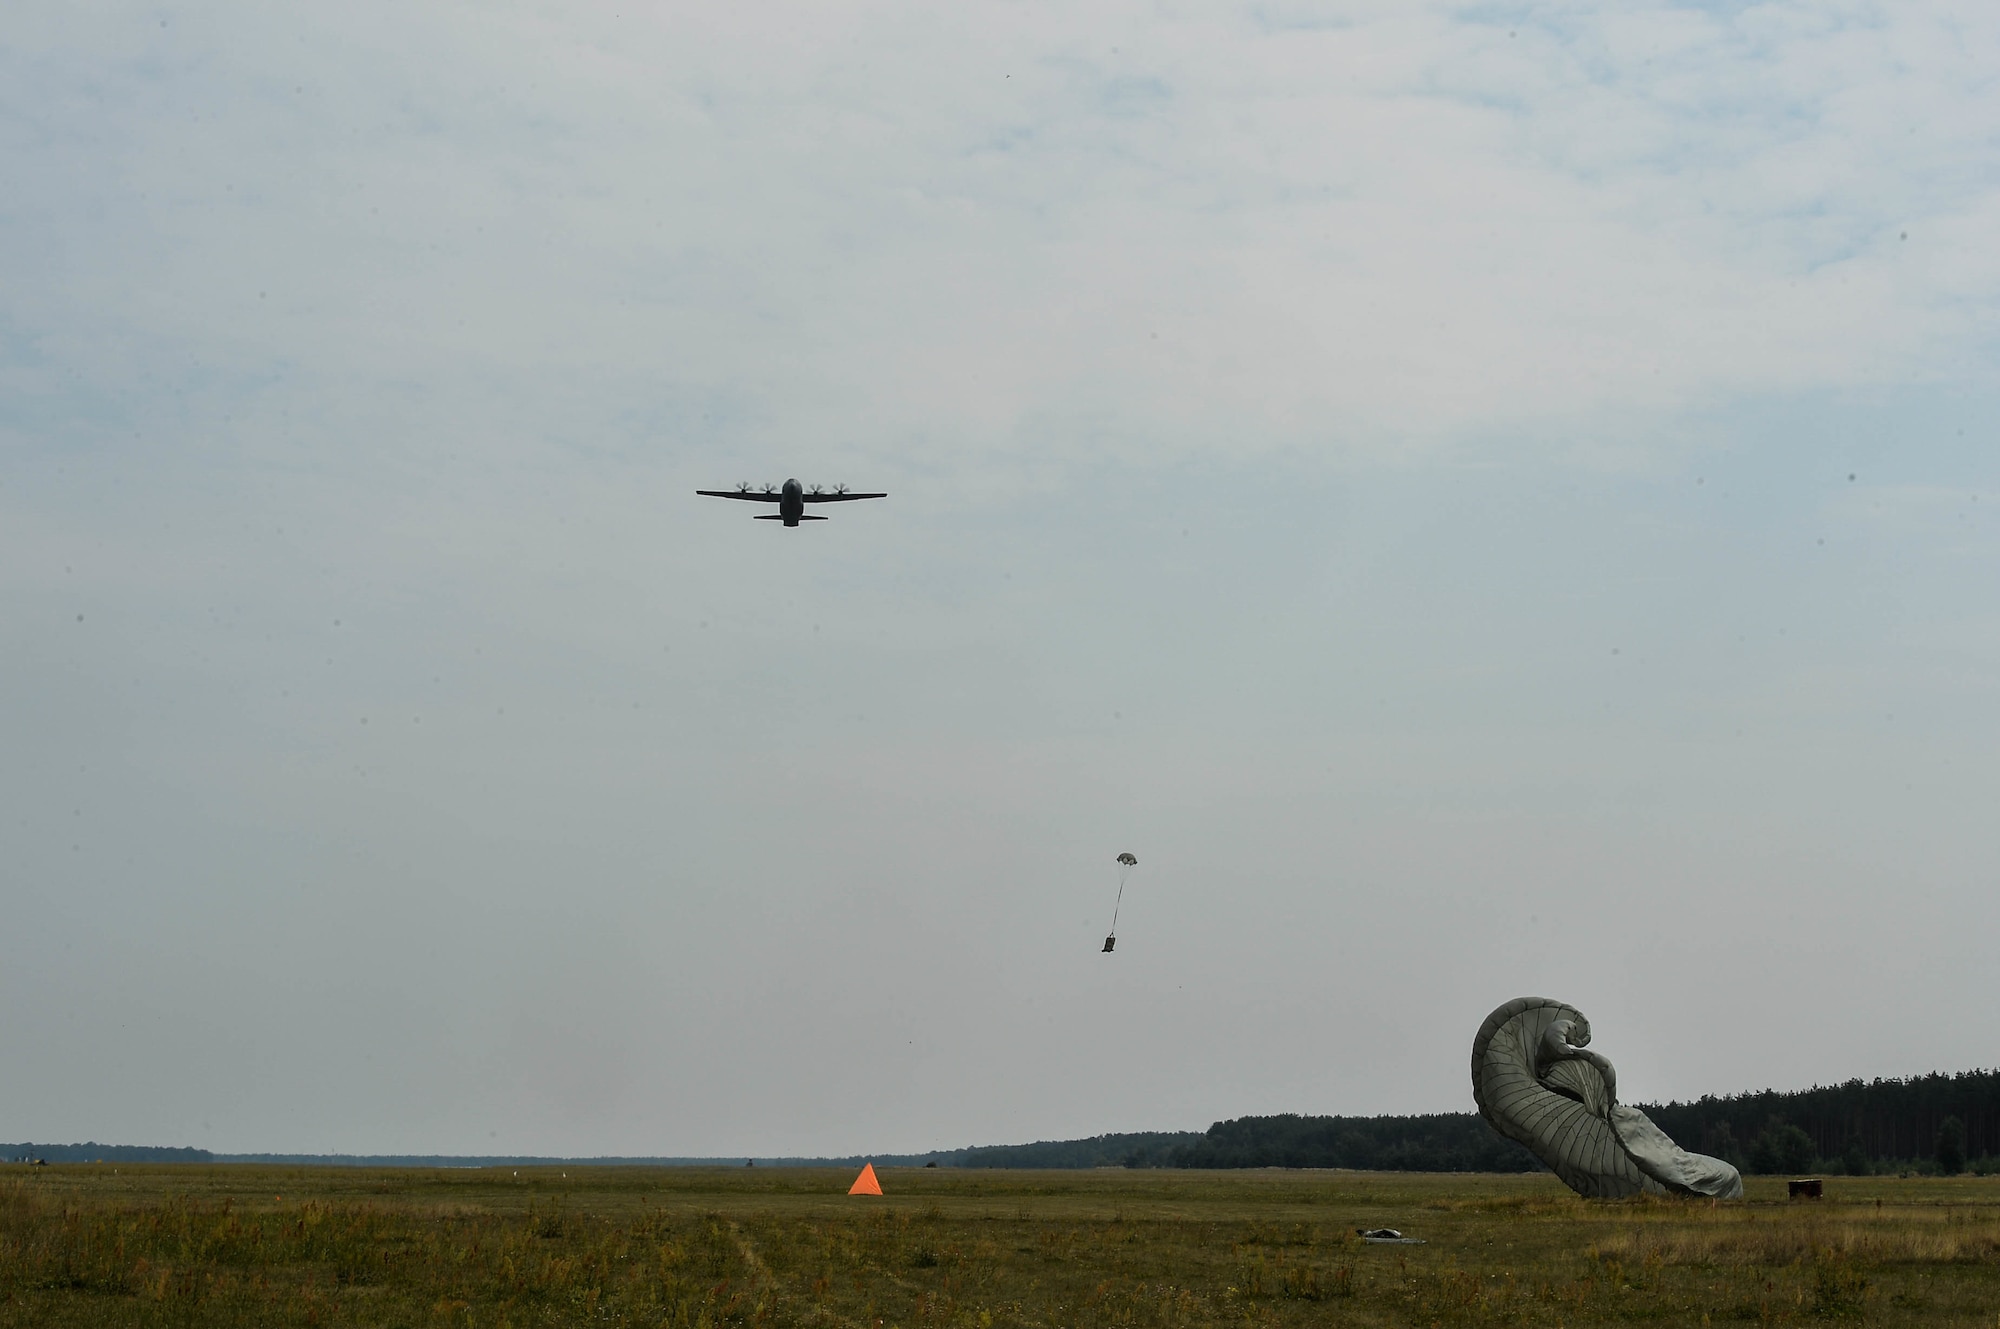 A U.S. Air Force C-130J Super Hercules flies over a drop zone as cargo delivery packages descend, over Powidz Air Base, Poland, Aug. 9, 2018. U.S. and Polish Airmen celebrated their partnership with an aerospace rodeo competition. (U.S. Air Force photo by Senior Airman Joshua Magbanua)